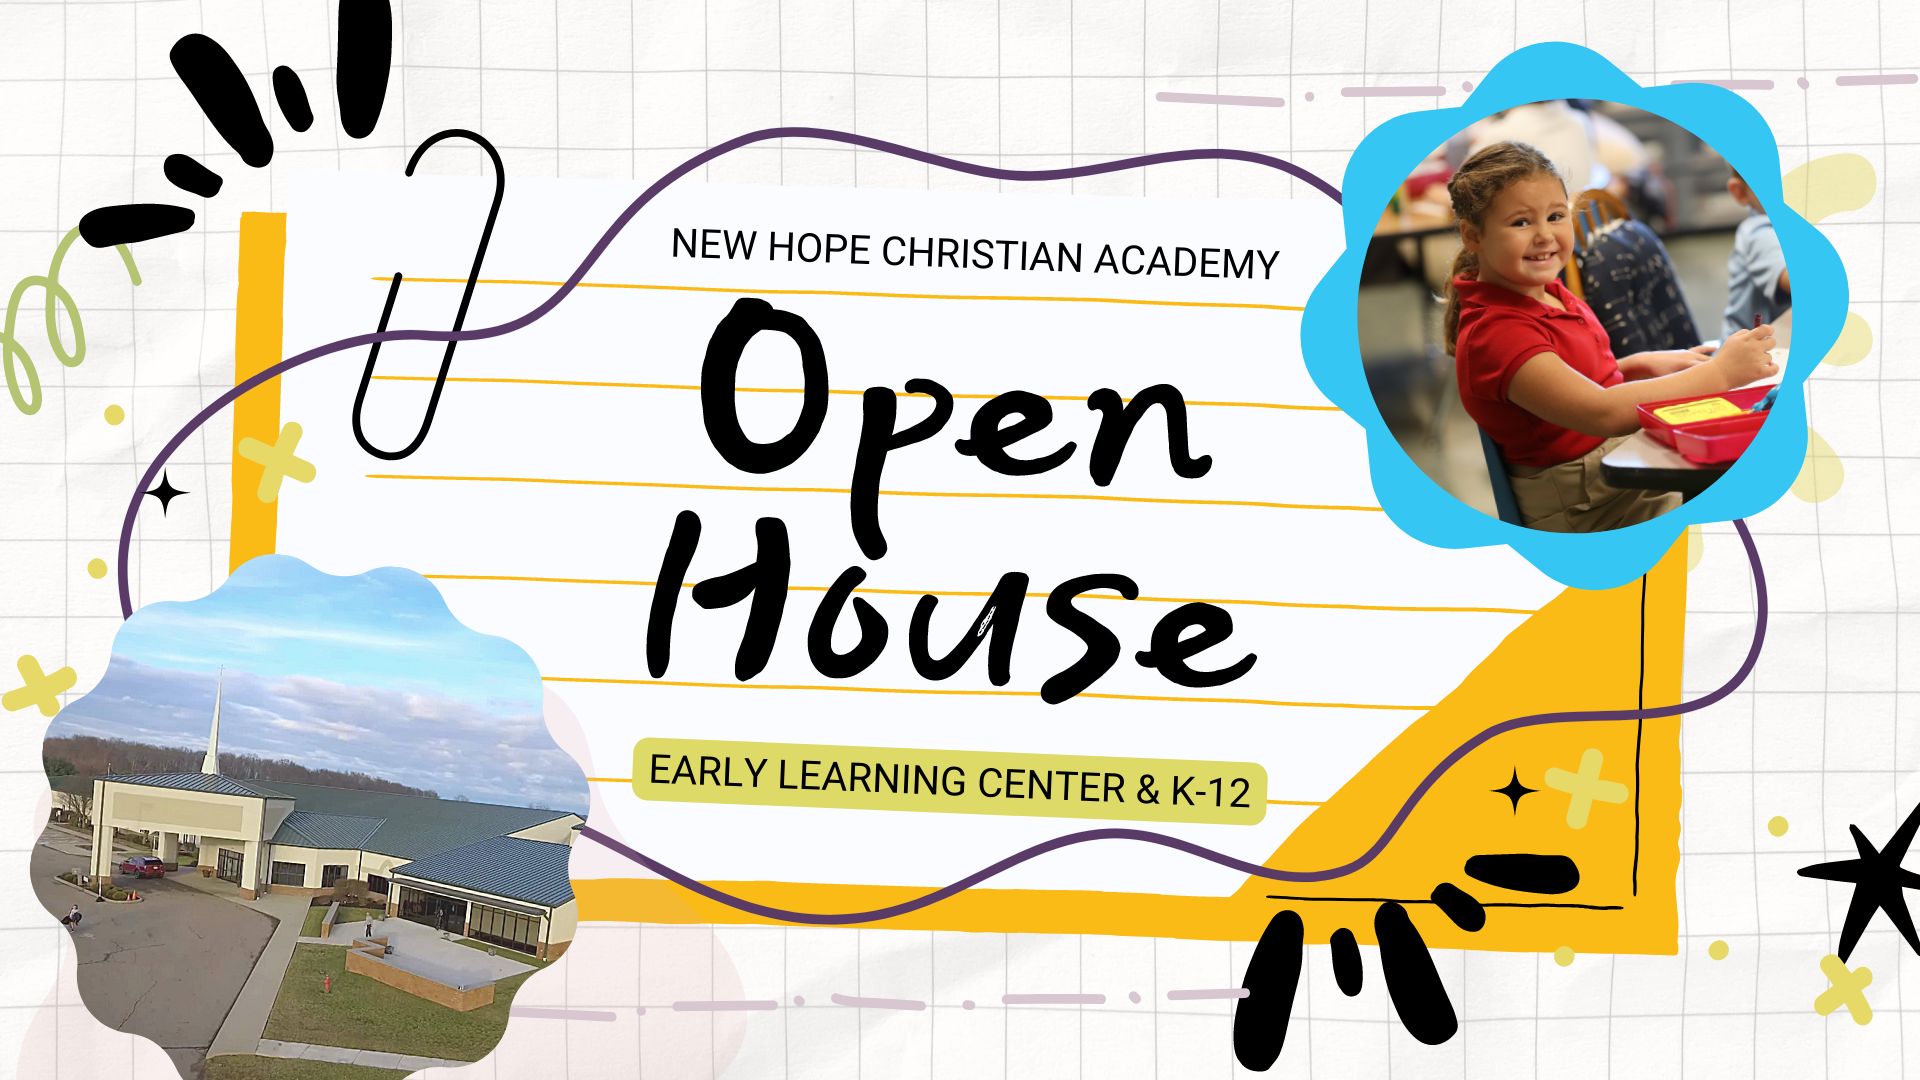 New Hope Christian Academy and Early Learning Center Open House, Circleville, Ohio, United States